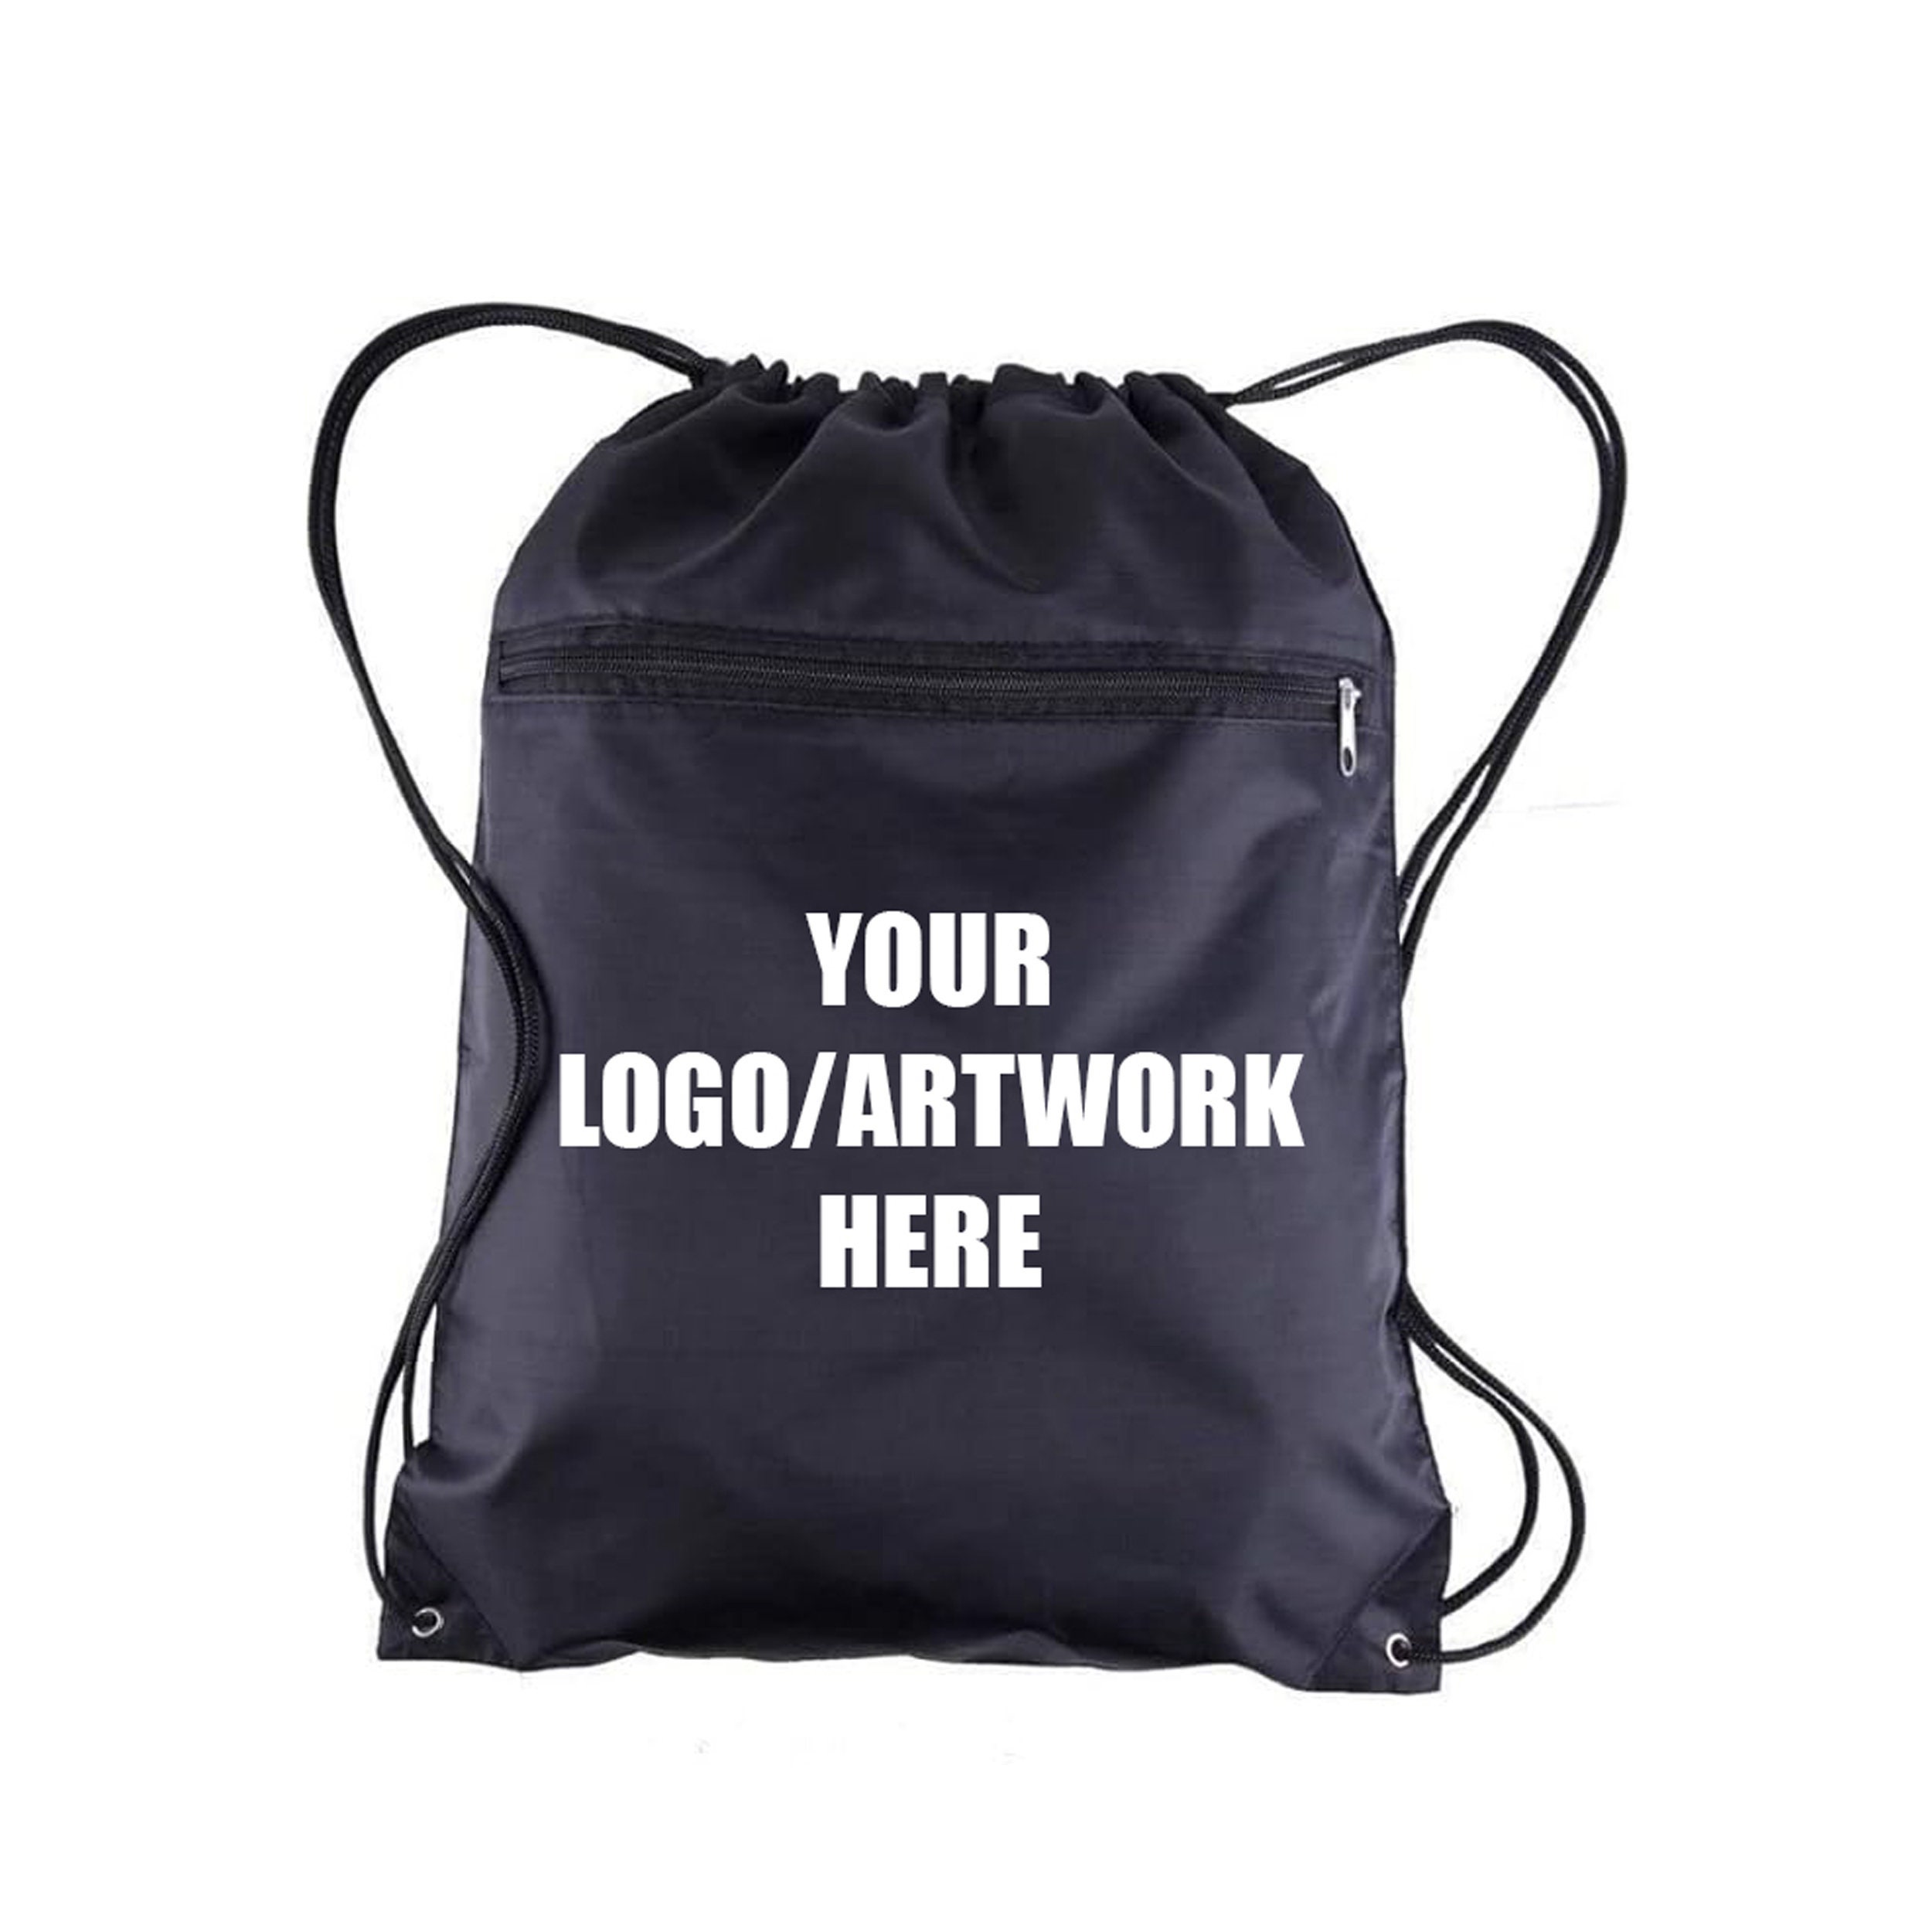 Drawstring bags with custom scout design - 150 pcs - only $2.47 each